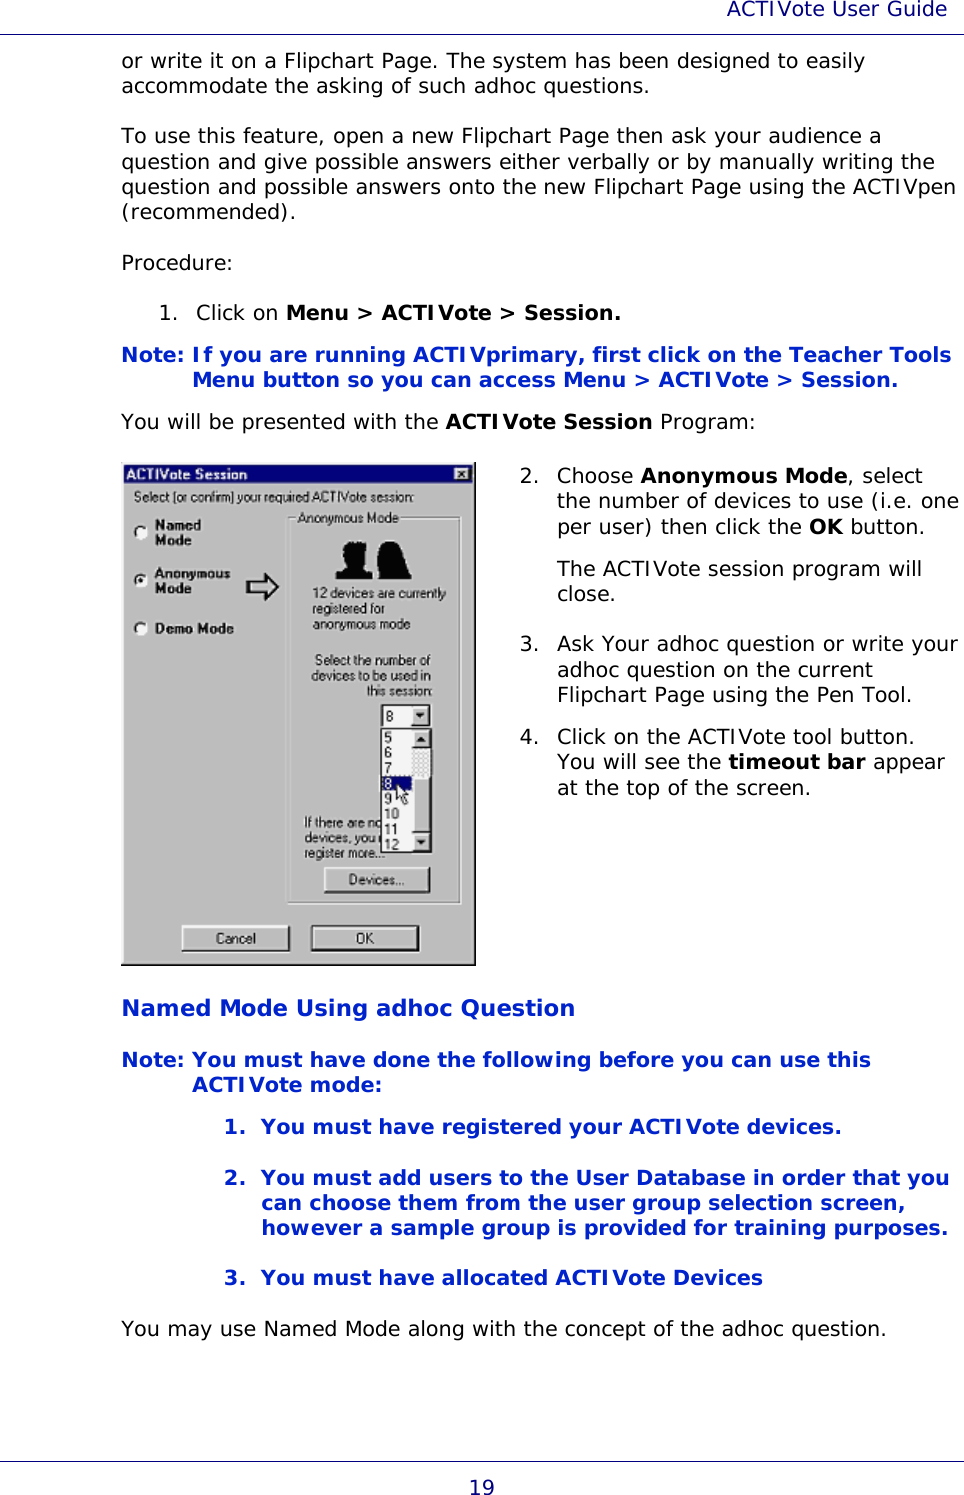 ACTIVote User Guide 19 or write it on a Flipchart Page. The system has been designed to easily accommodate the asking of such adhoc questions. To use this feature, open a new Flipchart Page then ask your audience a question and give possible answers either verbally or by manually writing the question and possible answers onto the new Flipchart Page using the ACTIVpen (recommended). Procedure: 1. Click on Menu &gt; ACTIVote &gt; Session. Note: If you are running ACTIVprimary, first click on the Teacher Tools Menu button so you can access Menu &gt; ACTIVote &gt; Session. You will be presented with the ACTIVote Session Program:  2. Choose Anonymous Mode, select the number of devices to use (i.e. one per user) then click the OK button.  The ACTIVote session program will close. 3. Ask Your adhoc question or write your adhoc question on the current Flipchart Page using the Pen Tool. 4. Click on the ACTIVote tool button. You will see the timeout bar appear at the top of the screen. Named Mode Using adhoc Question Note: You must have done the following before you can use this ACTIVote mode: 1. You must have registered your ACTIVote devices. 2. You must add users to the User Database in order that you can choose them from the user group selection screen, however a sample group is provided for training purposes. 3. You must have allocated ACTIVote Devices You may use Named Mode along with the concept of the adhoc question. 